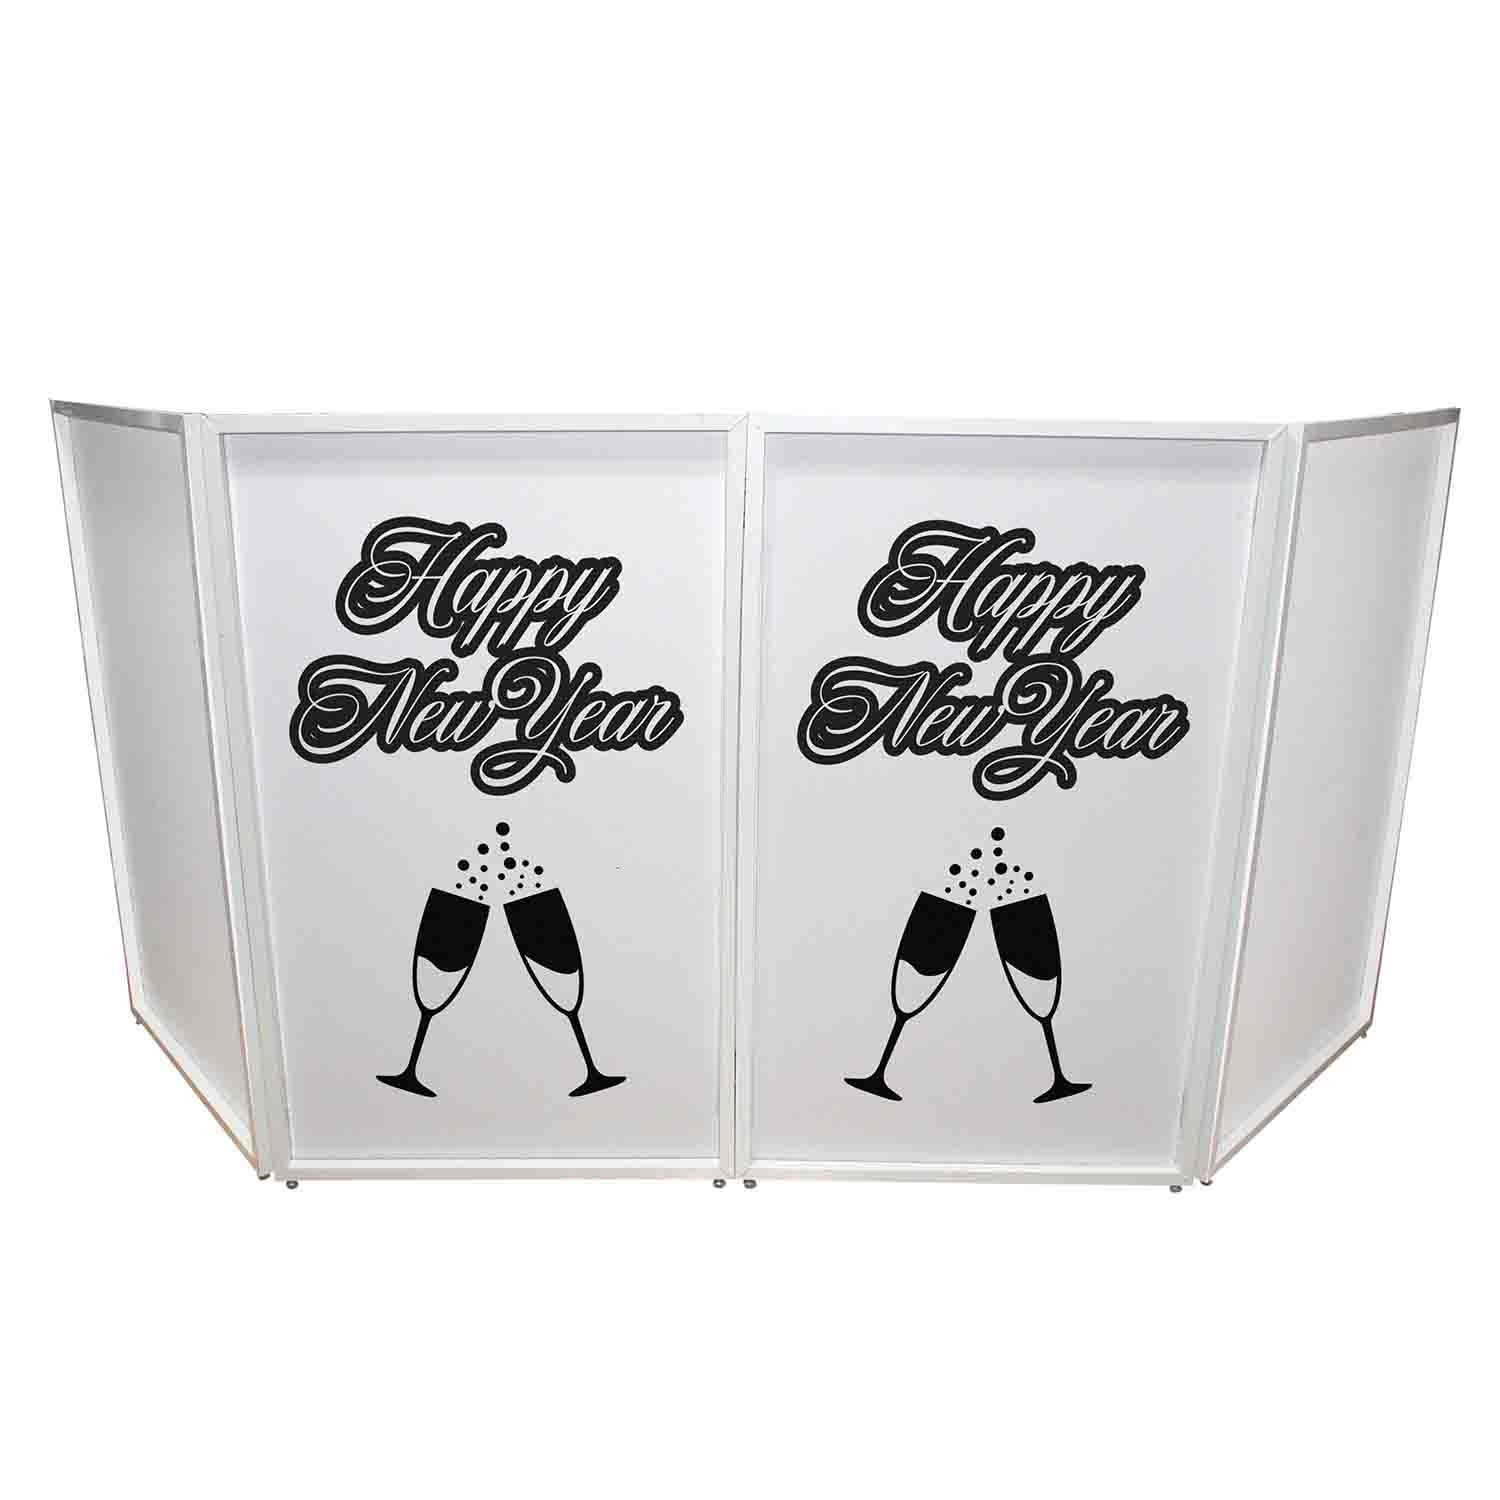 ProX XF-SNYTOAST Set of Two New Year Toast Design Enhancement Scrim - Black Script on White - Hollywood DJ